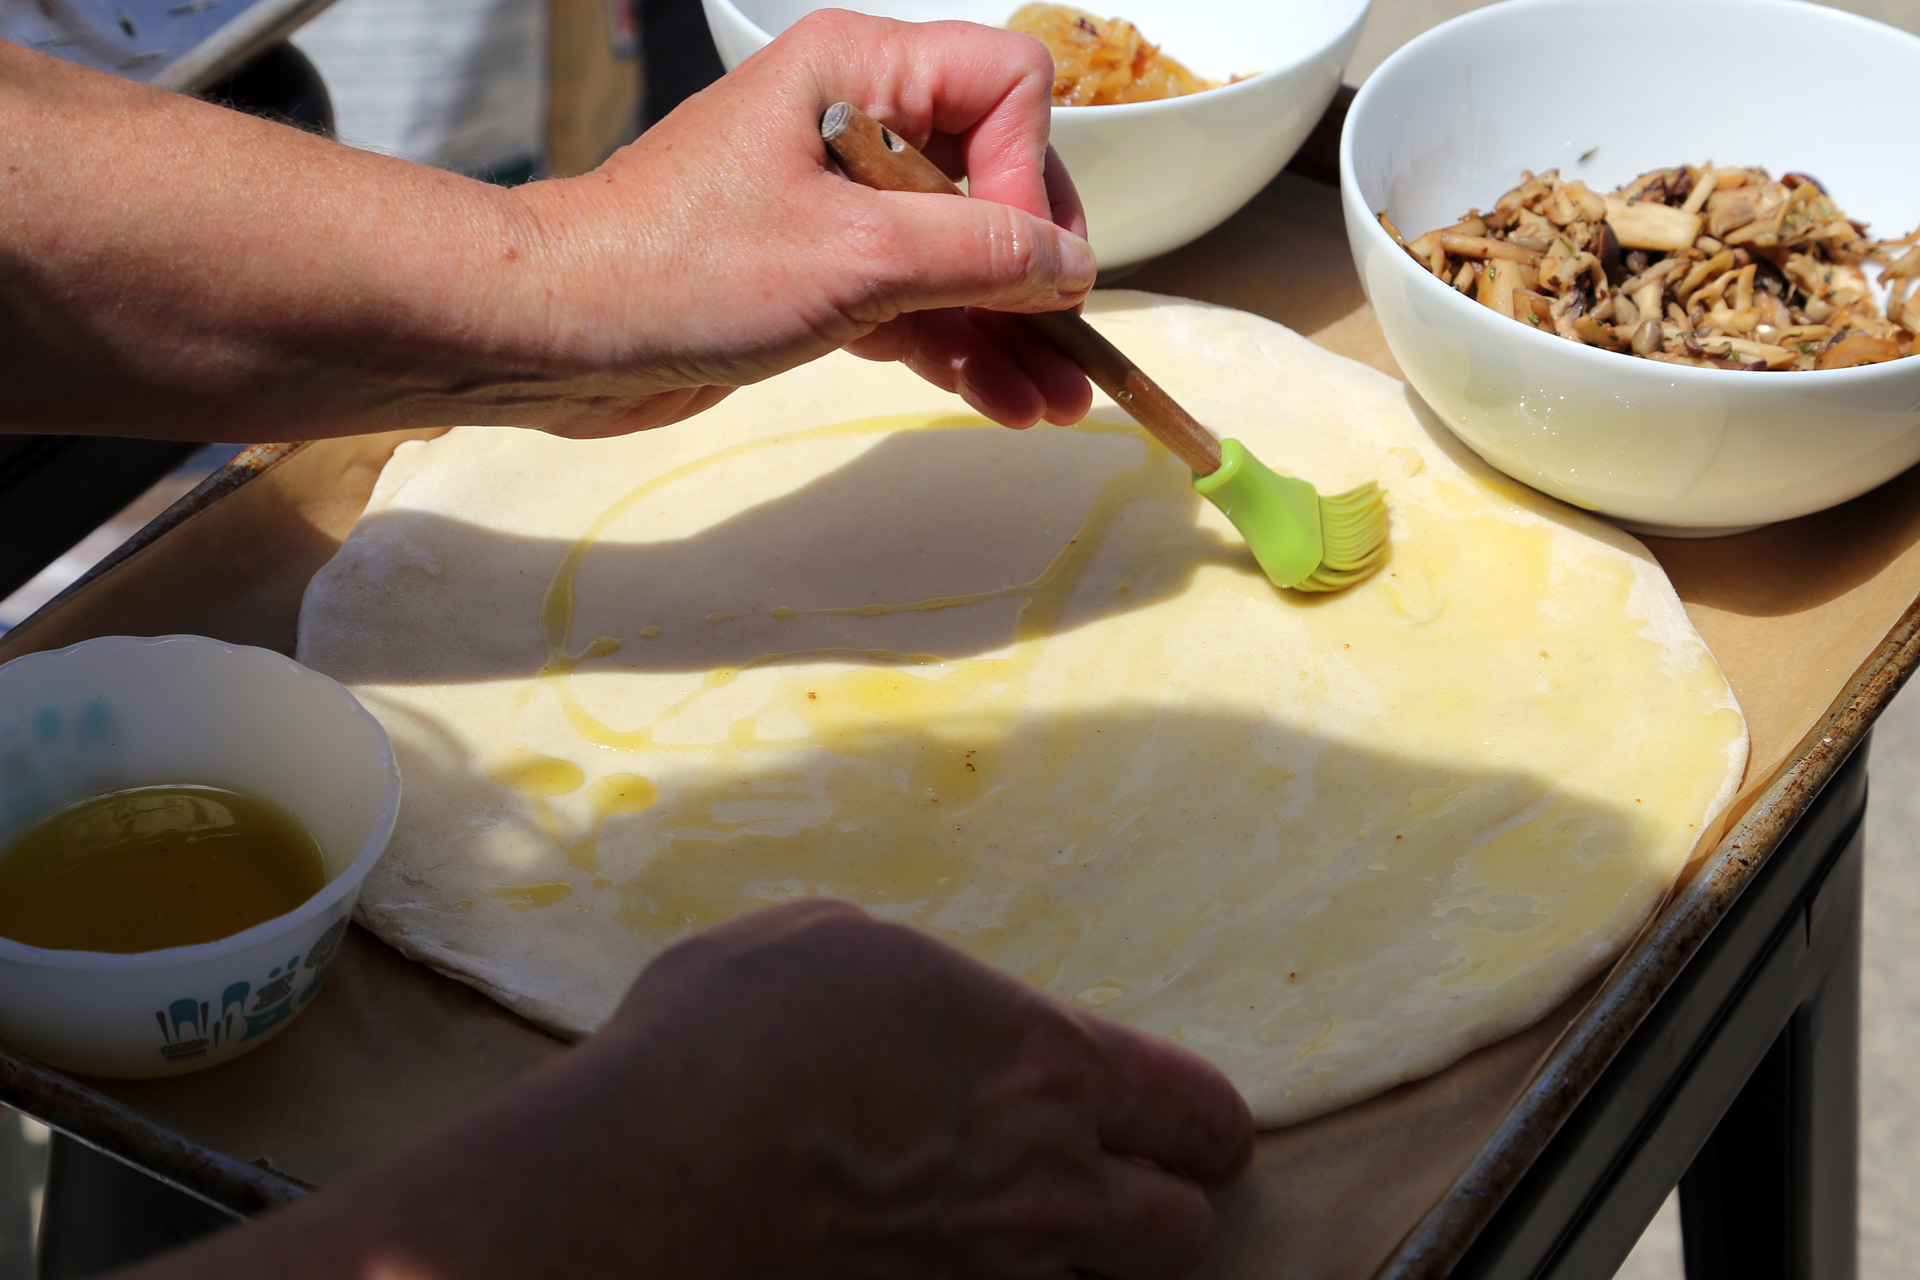 Place each on a parchment-lined baking sheet. For each dough round, brush one side lightly with olive oil.